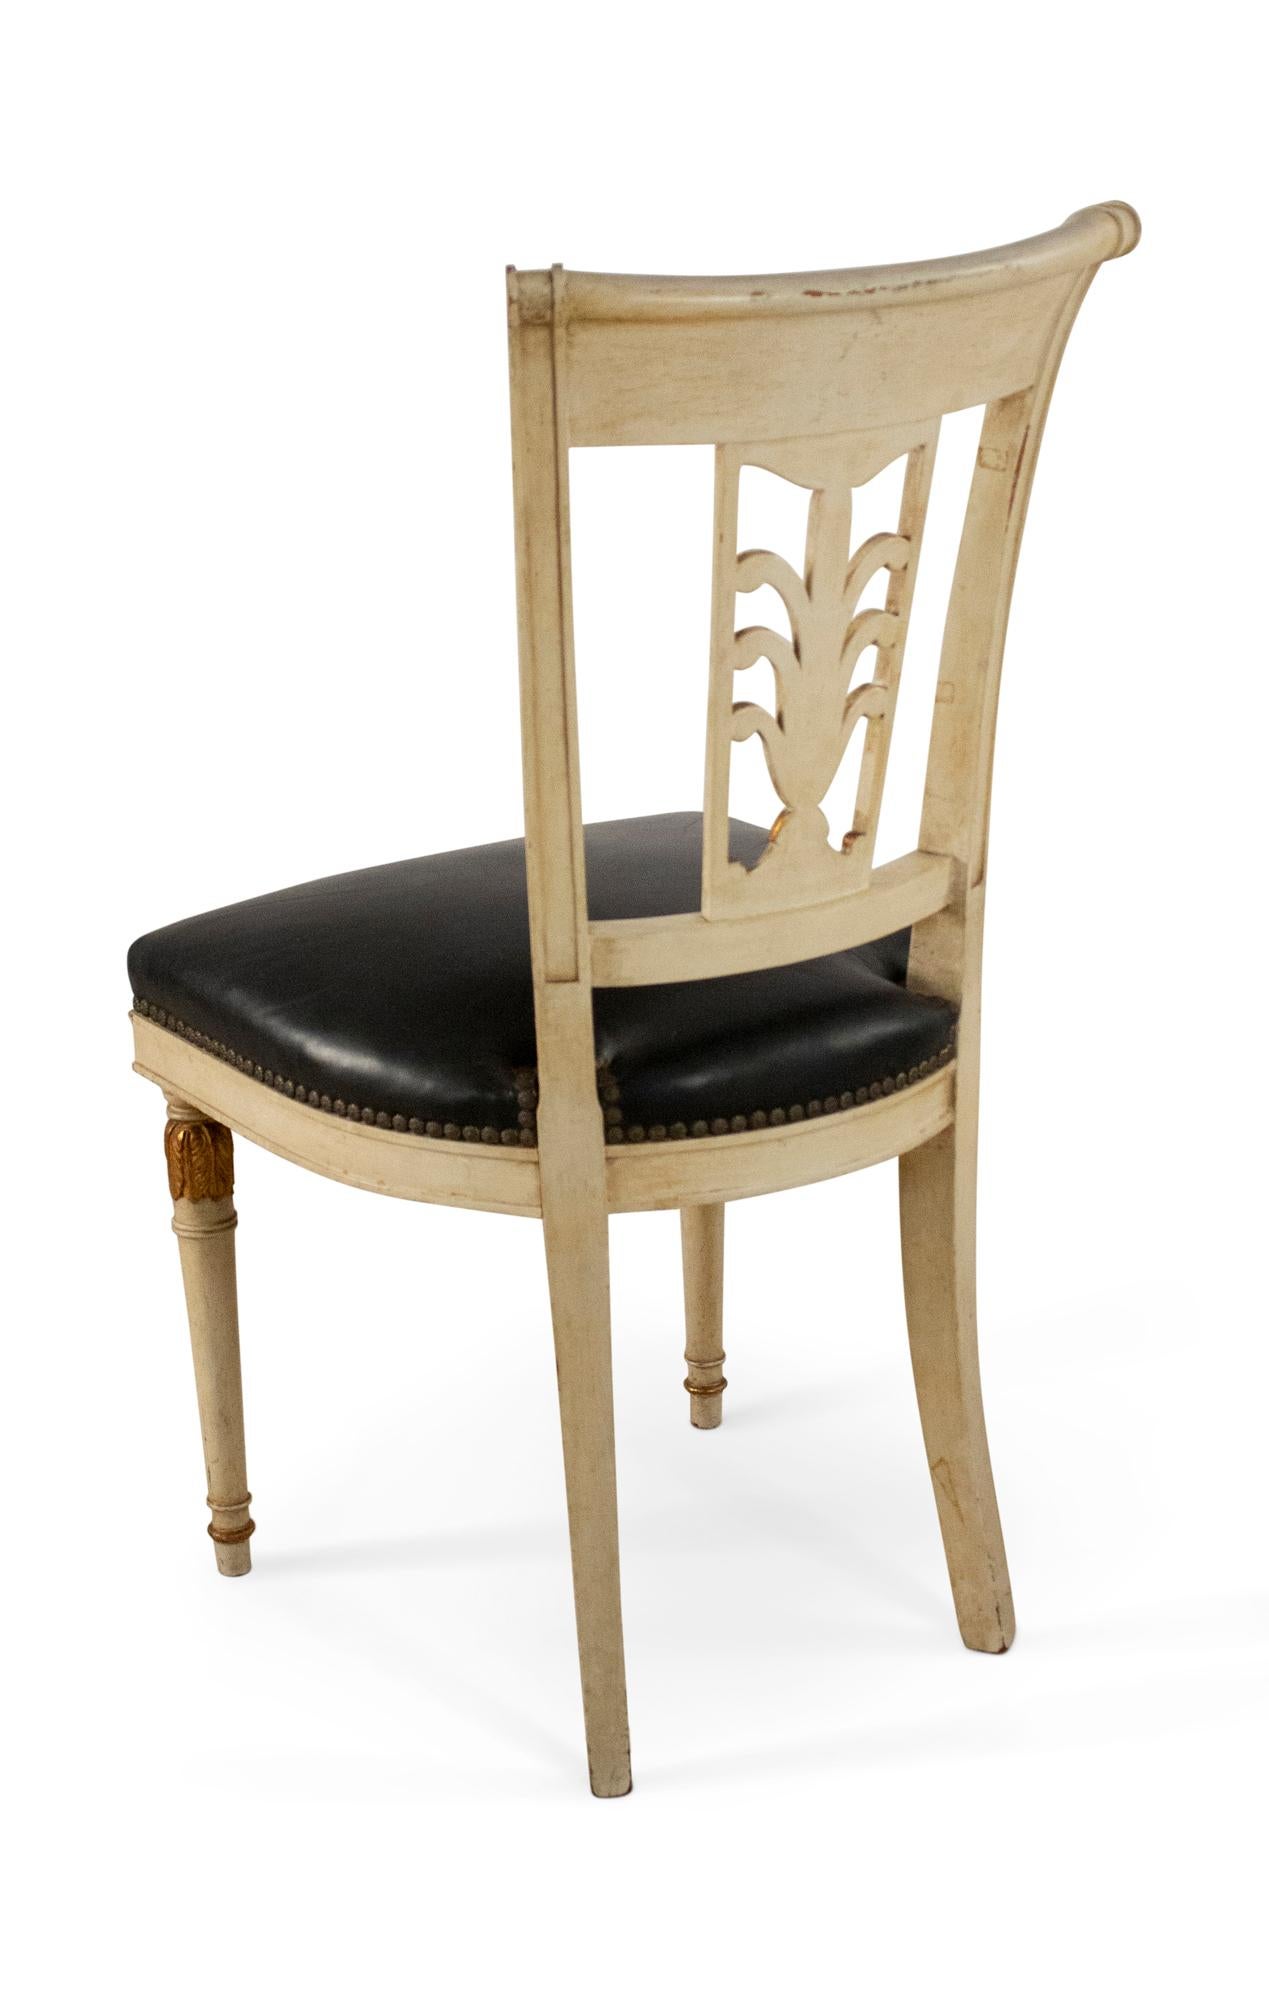 20th Century Jansen French Directoire Style Beige and Gilt Painted Wood and Black Leather